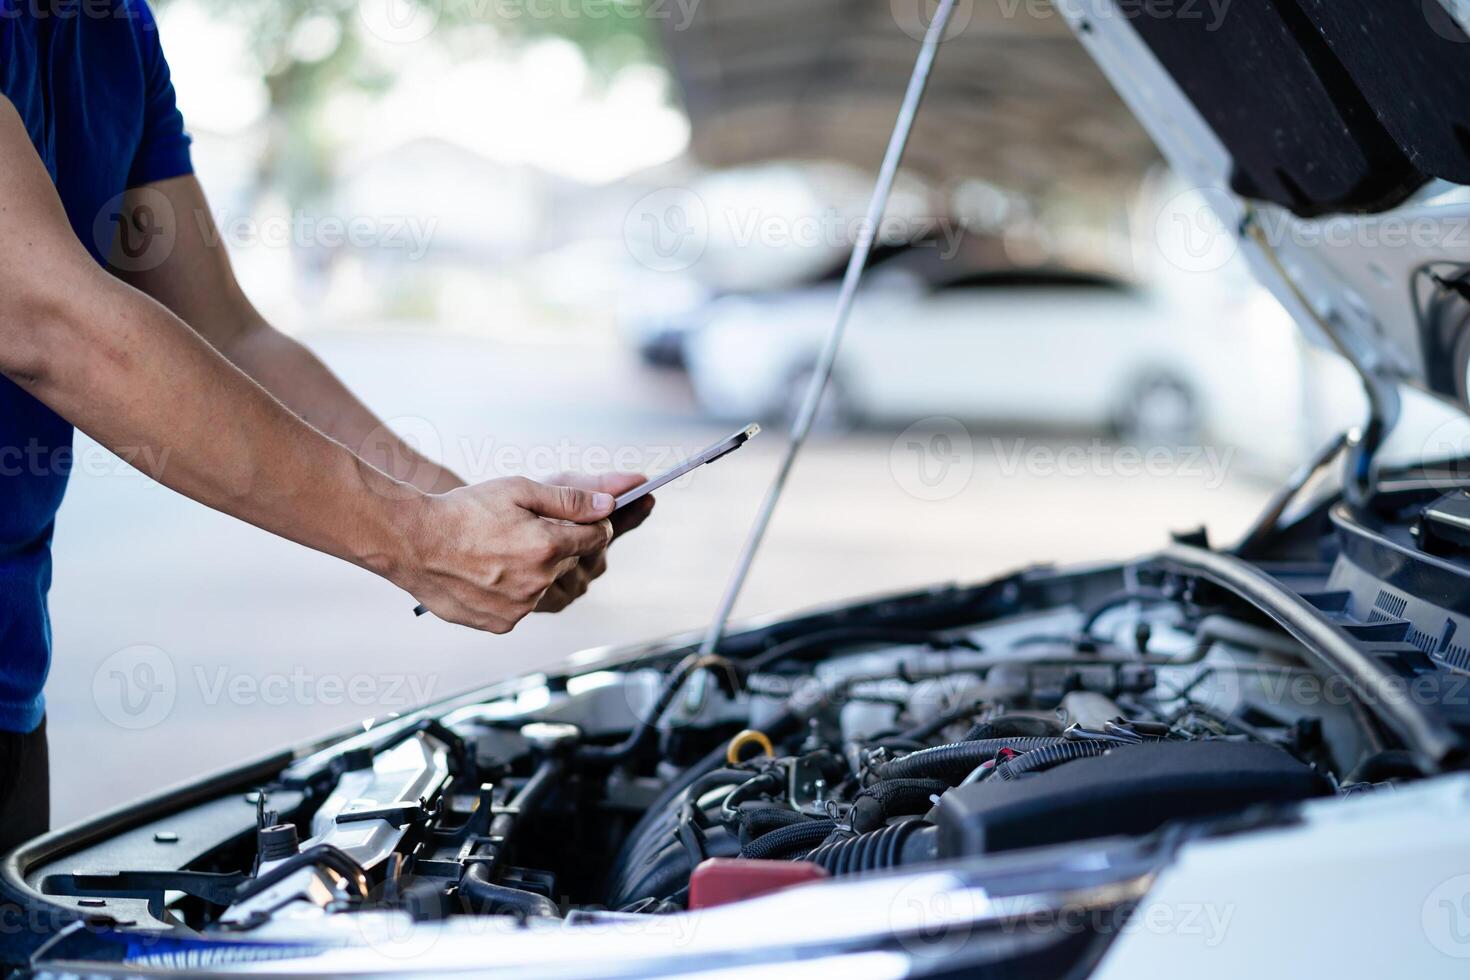 A man in a blue shirt is looking at a tablet while standing next to a car. He is checking the car's engine photo